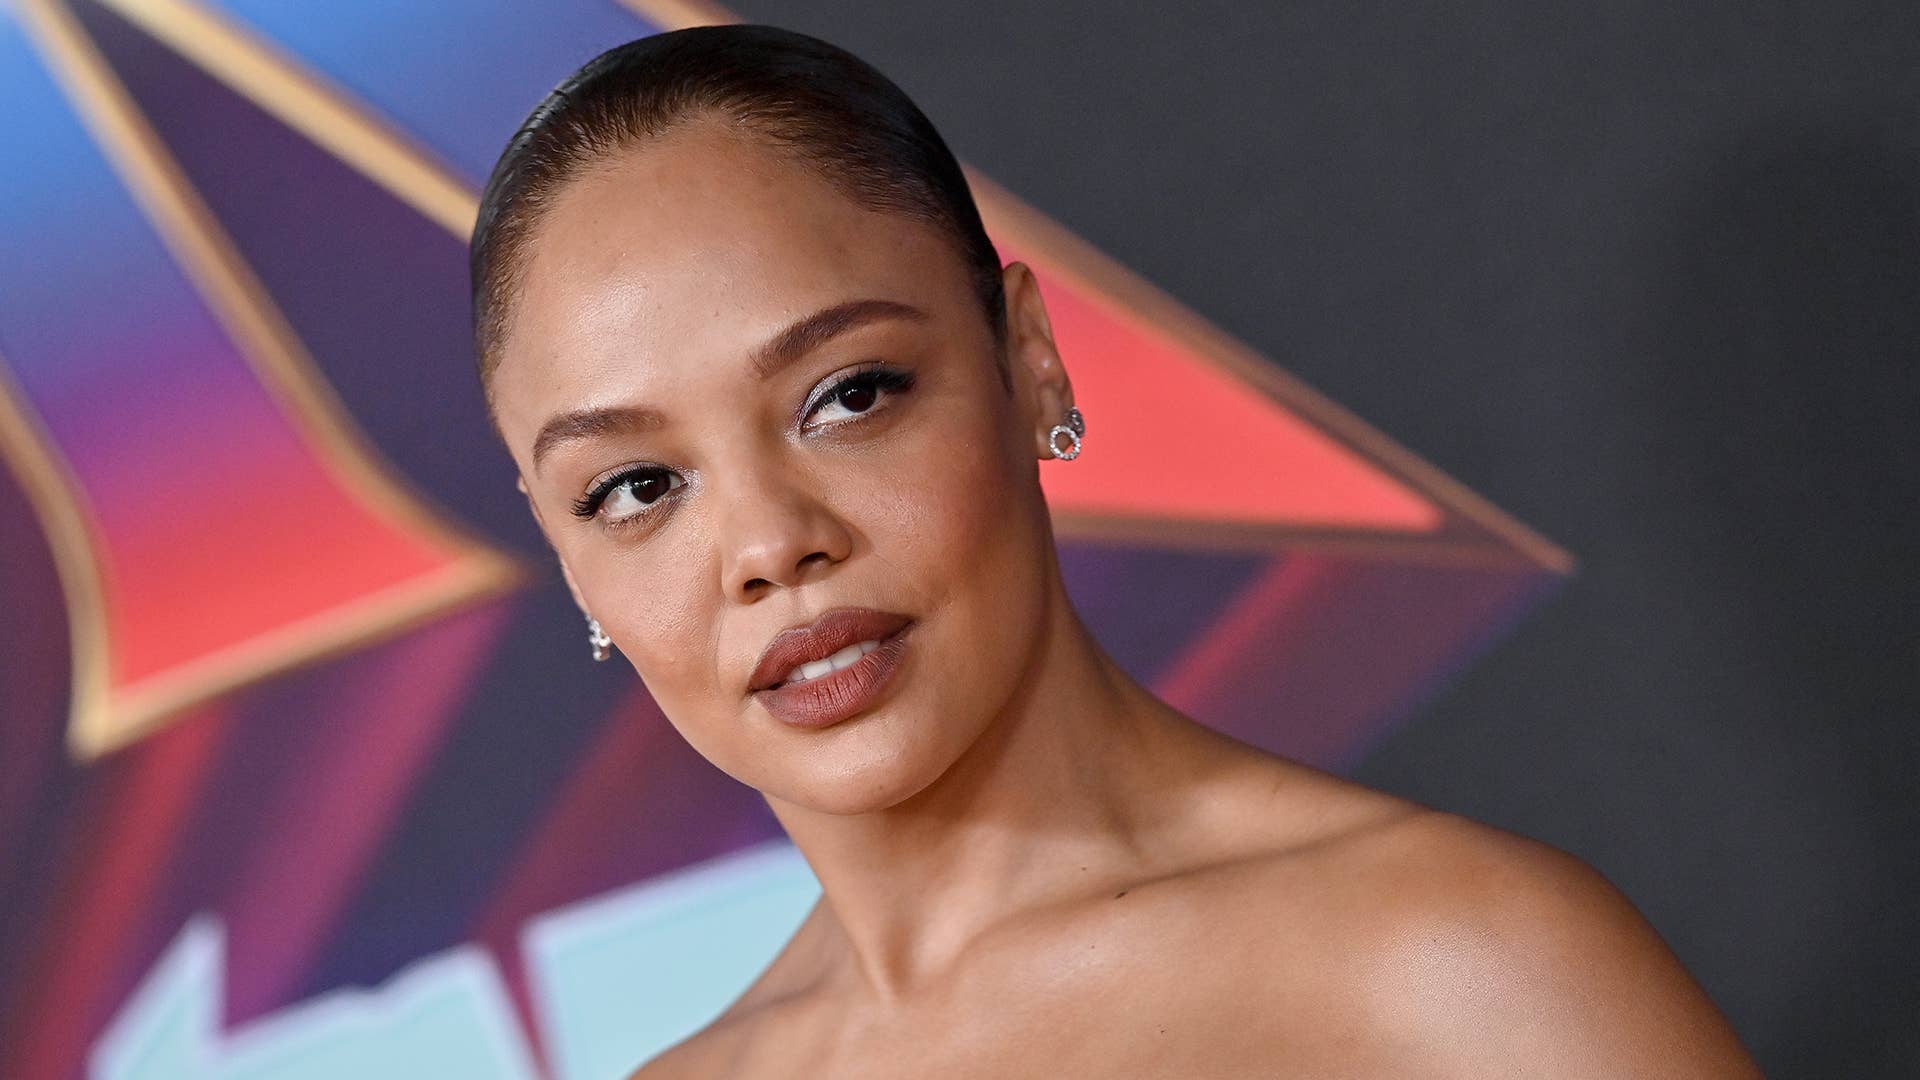 Tessa Thompson attends Marvel Studios "Thor: Love and Thunder" Los Angeles Premiere